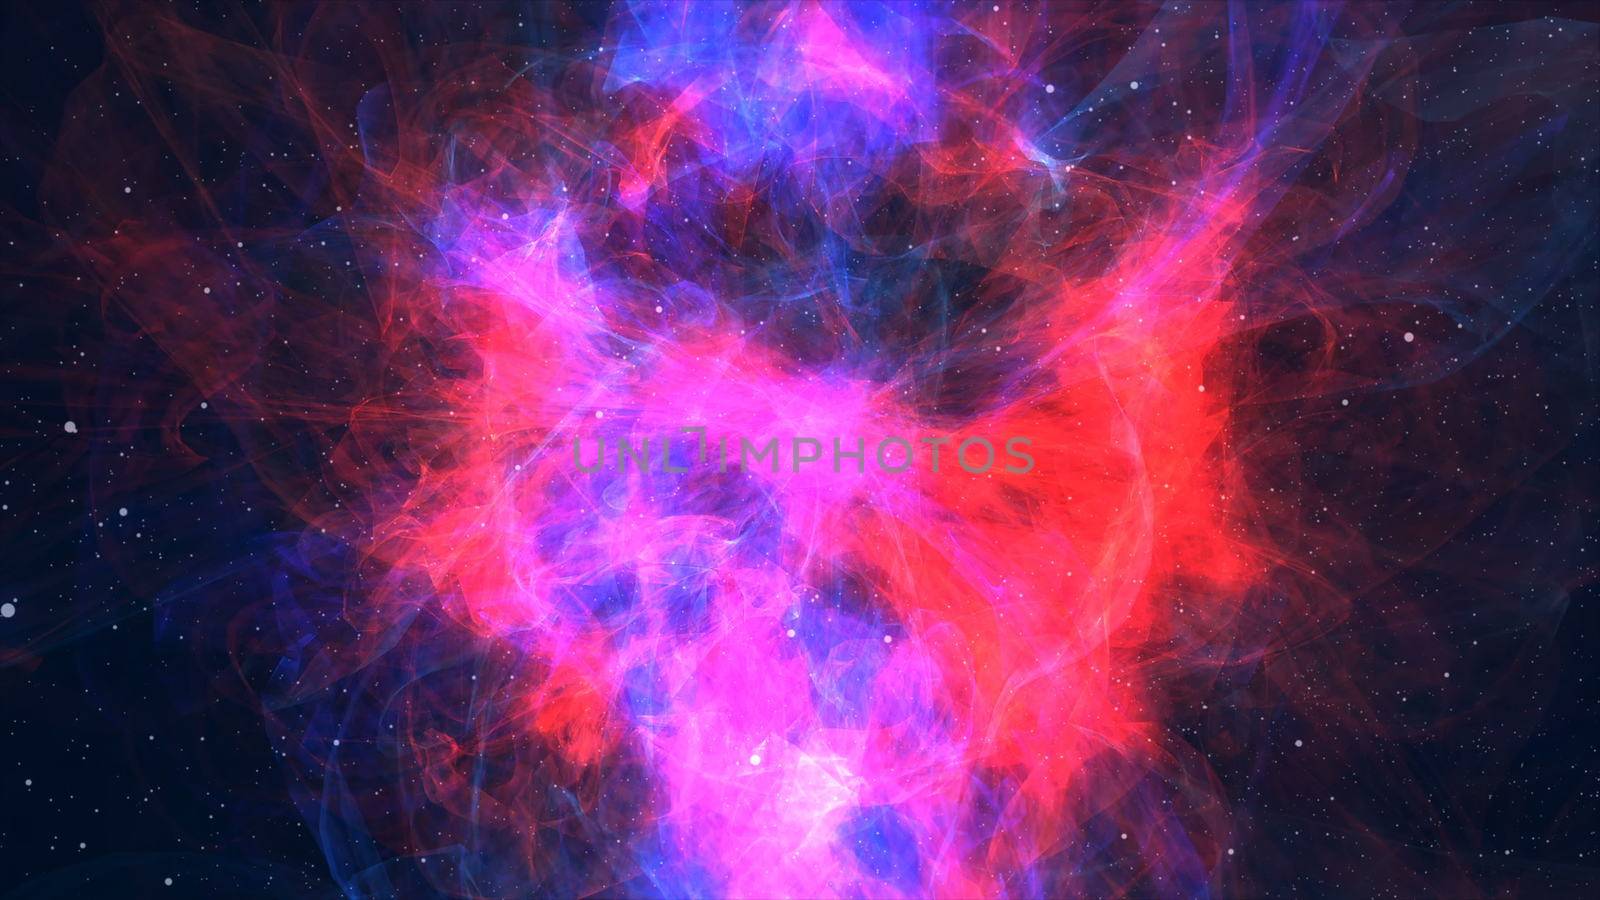 Approximation to the fantastic and colorful nebula by nolimit046